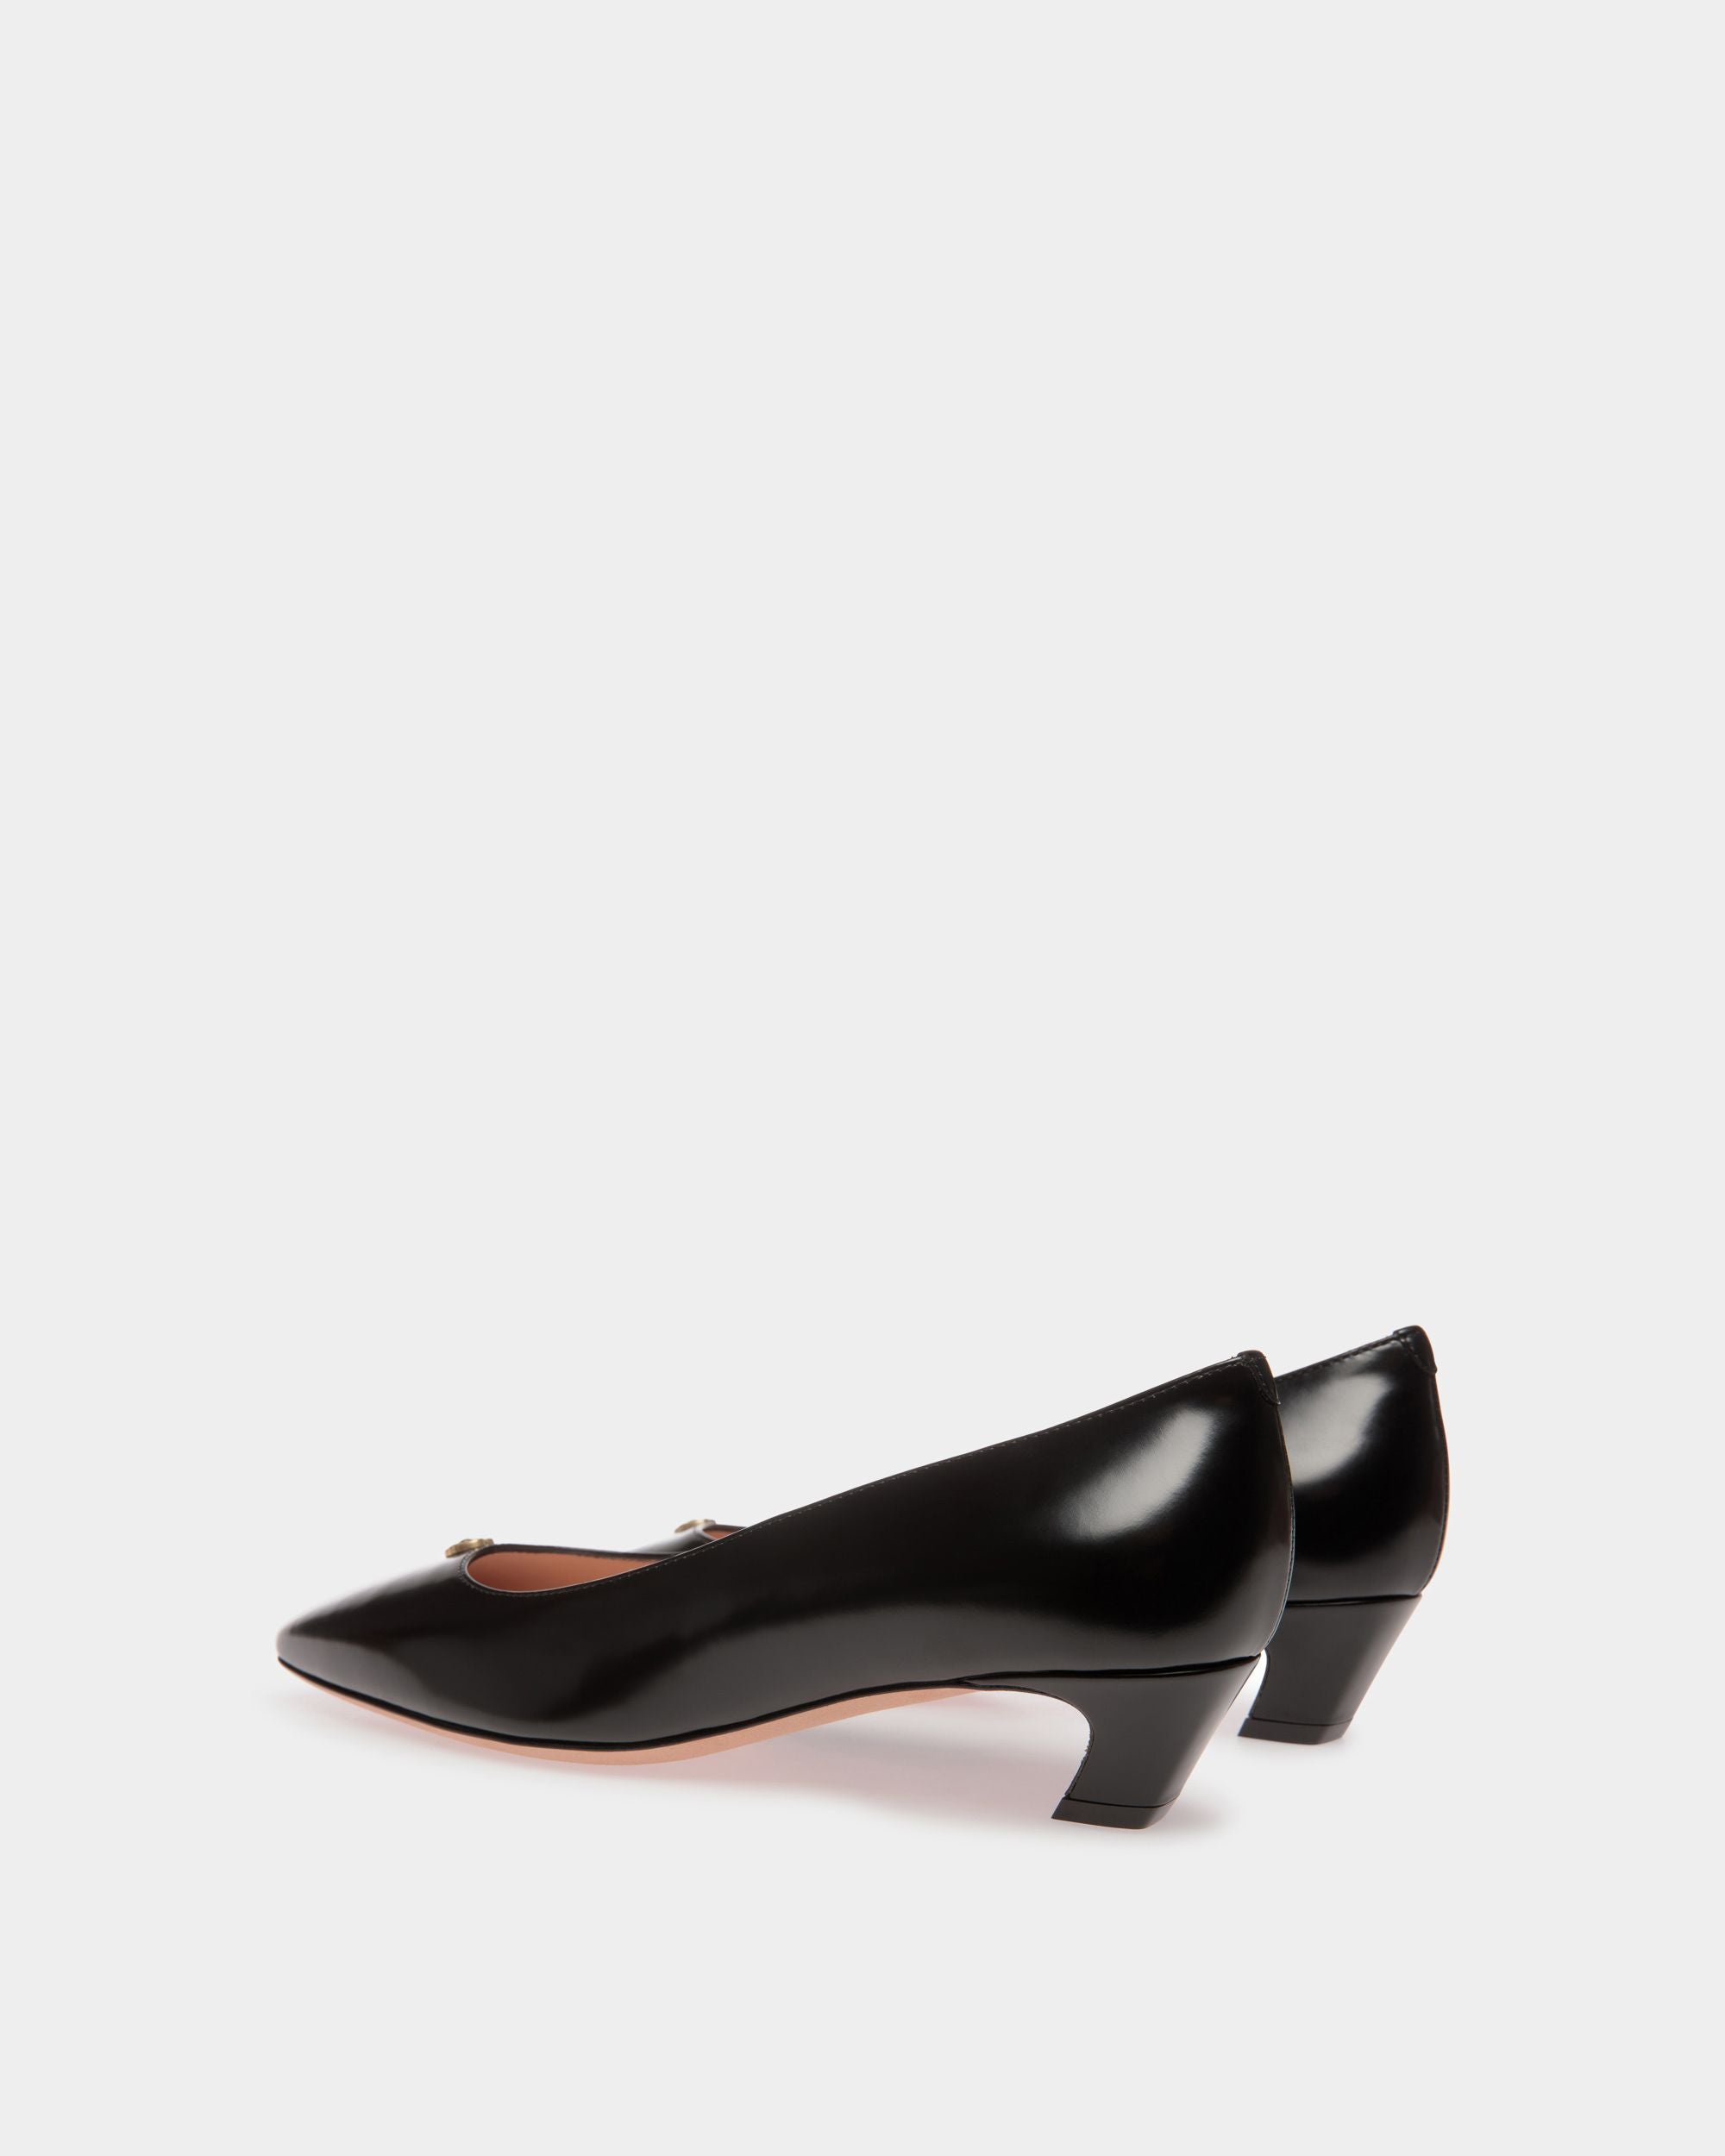 Sylt | Women's Pump in Black Leather | Bally | Still Life 3/4 Back